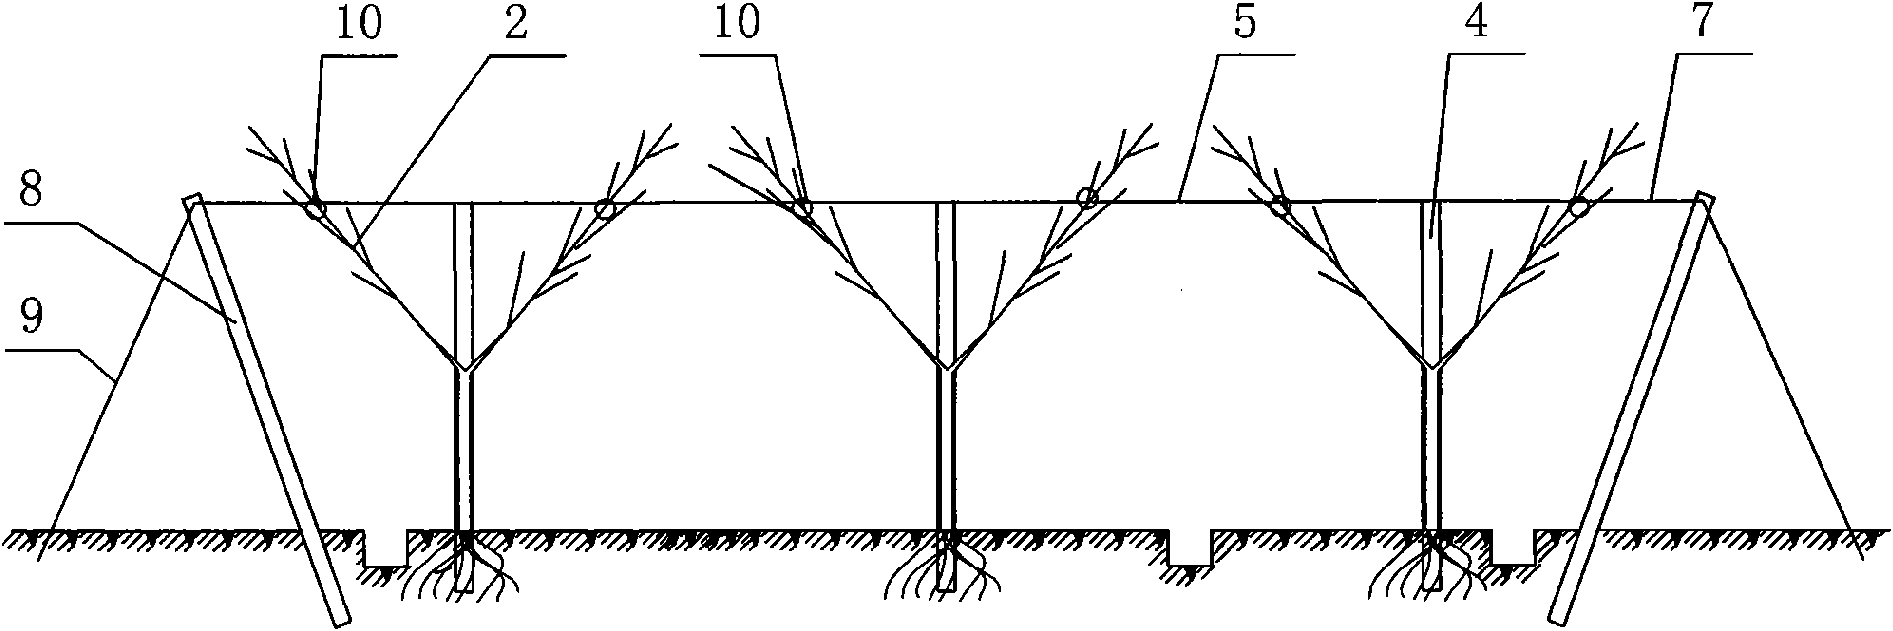 Y-shaped fruit tree and net rack for fixing branches of same